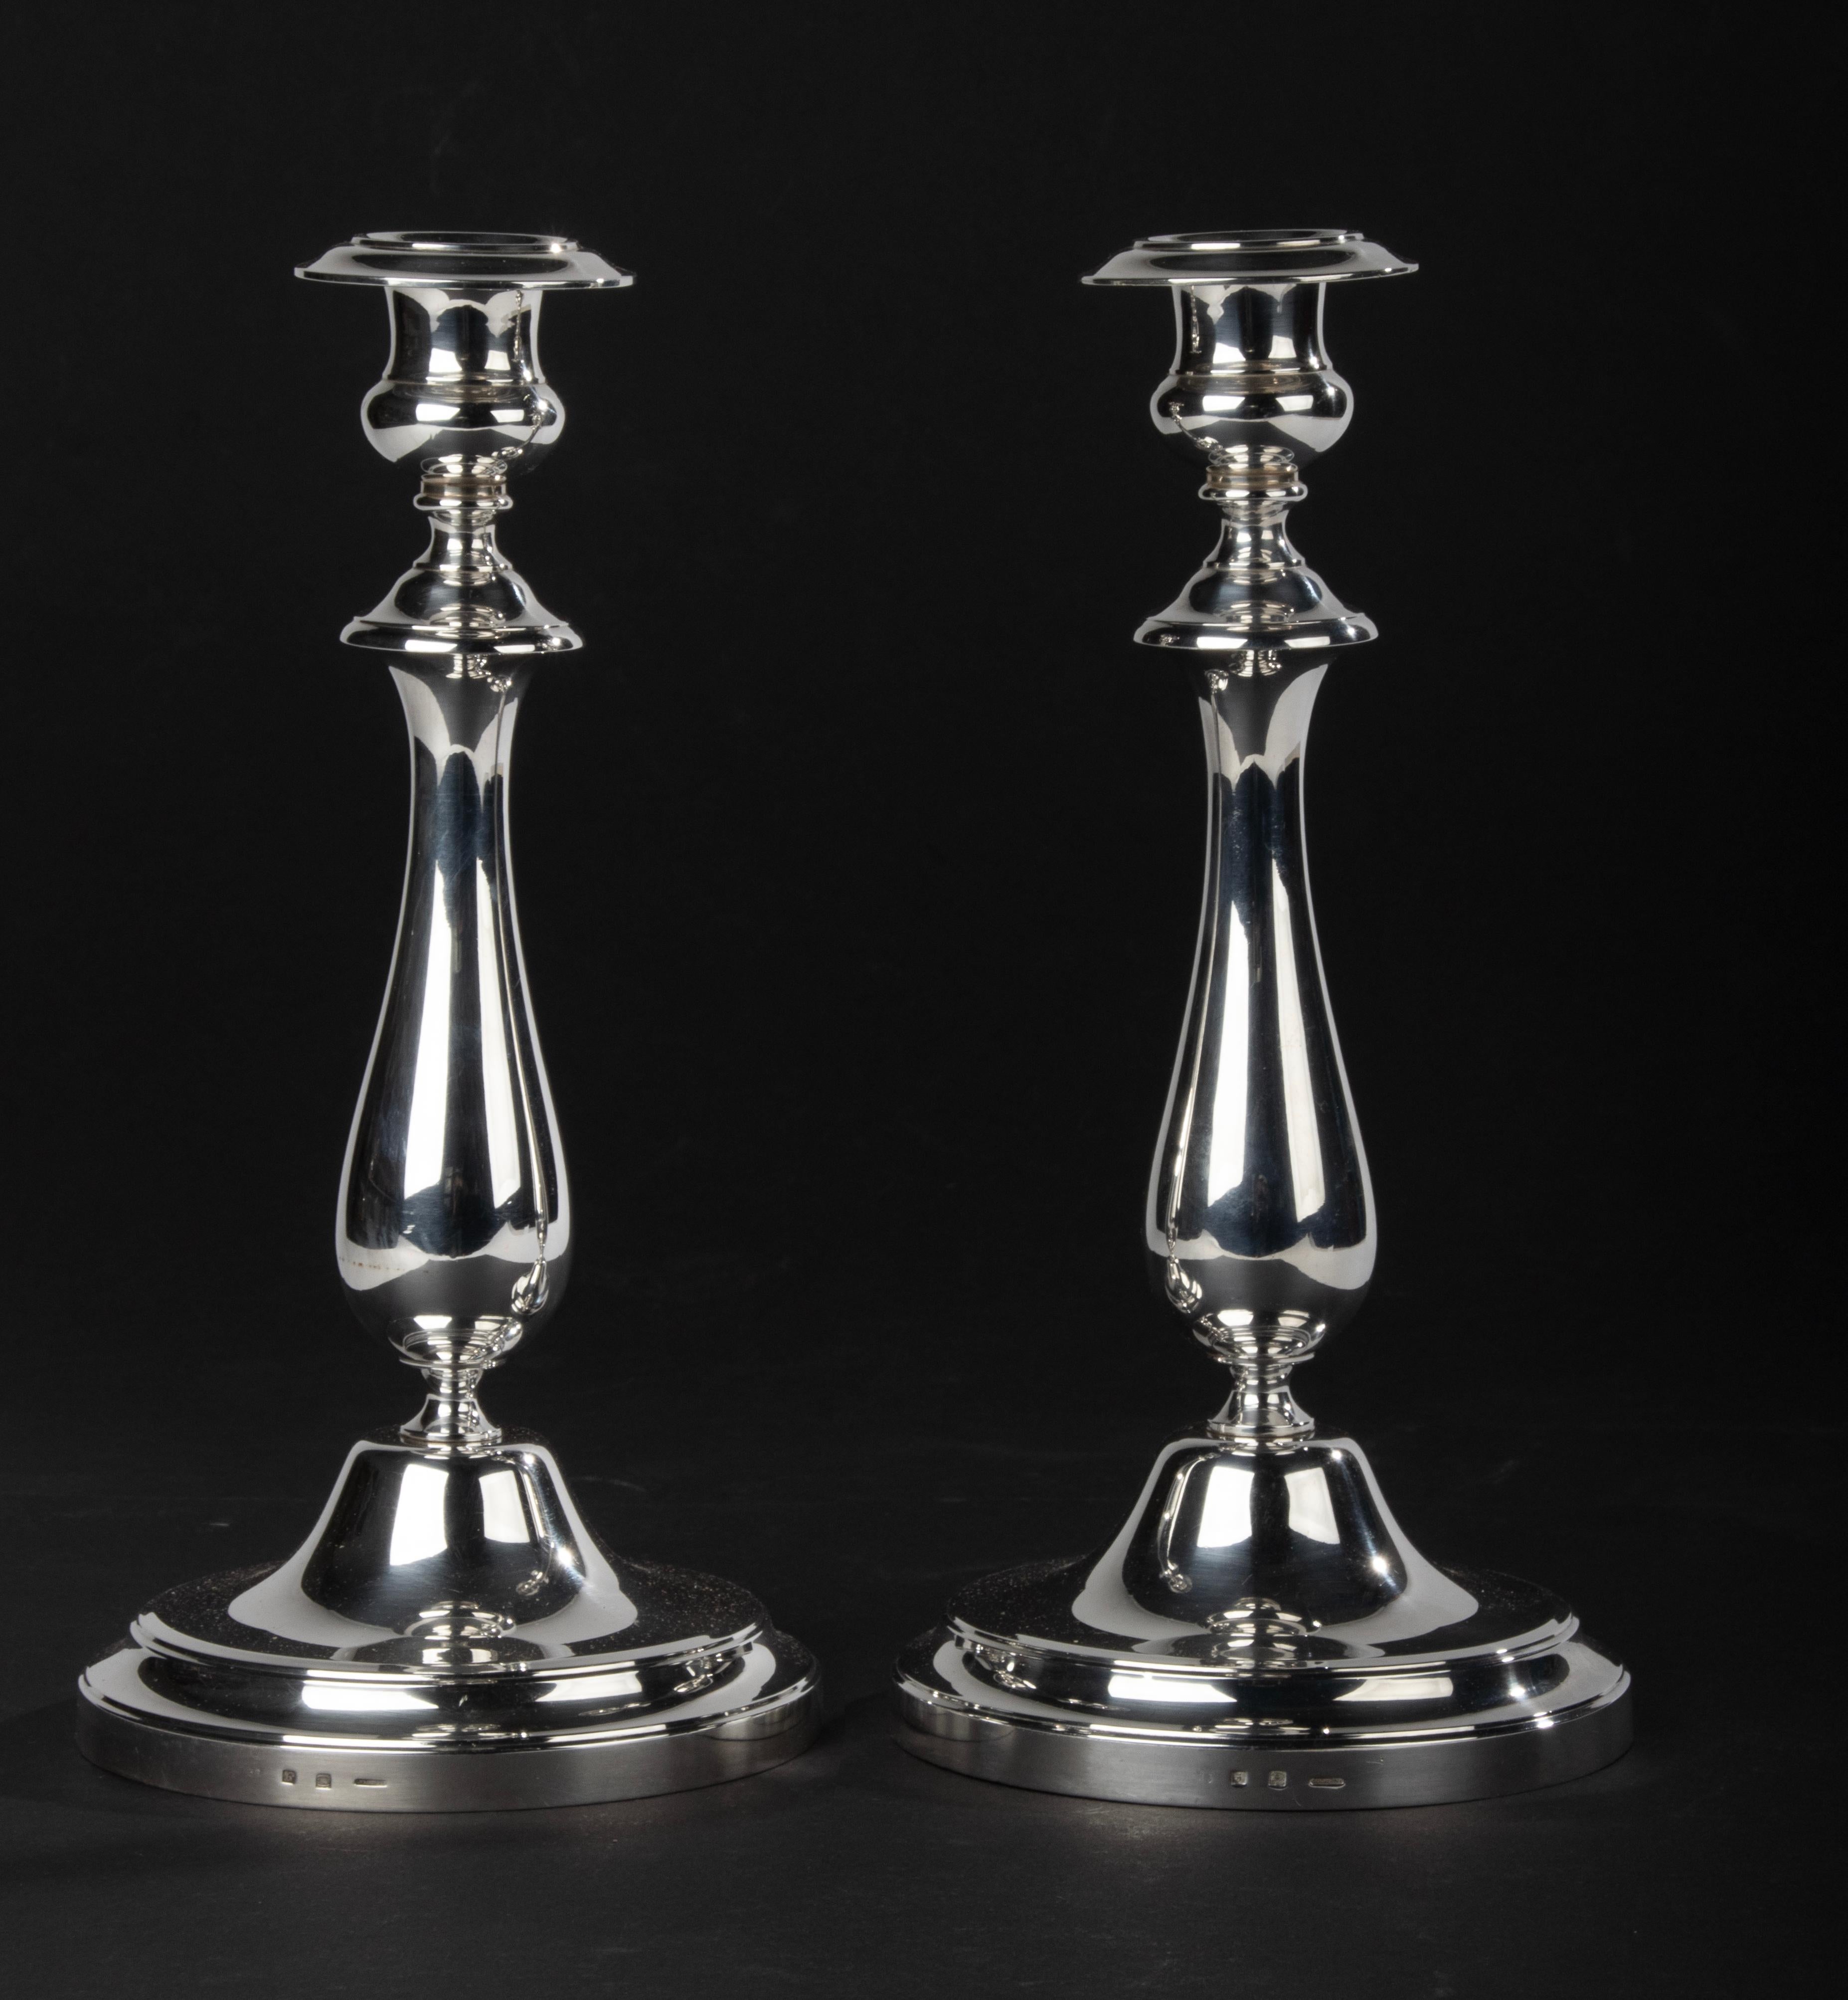 French A Pair of Modern Classic Silver Plated Candlesticks made by Christofle France